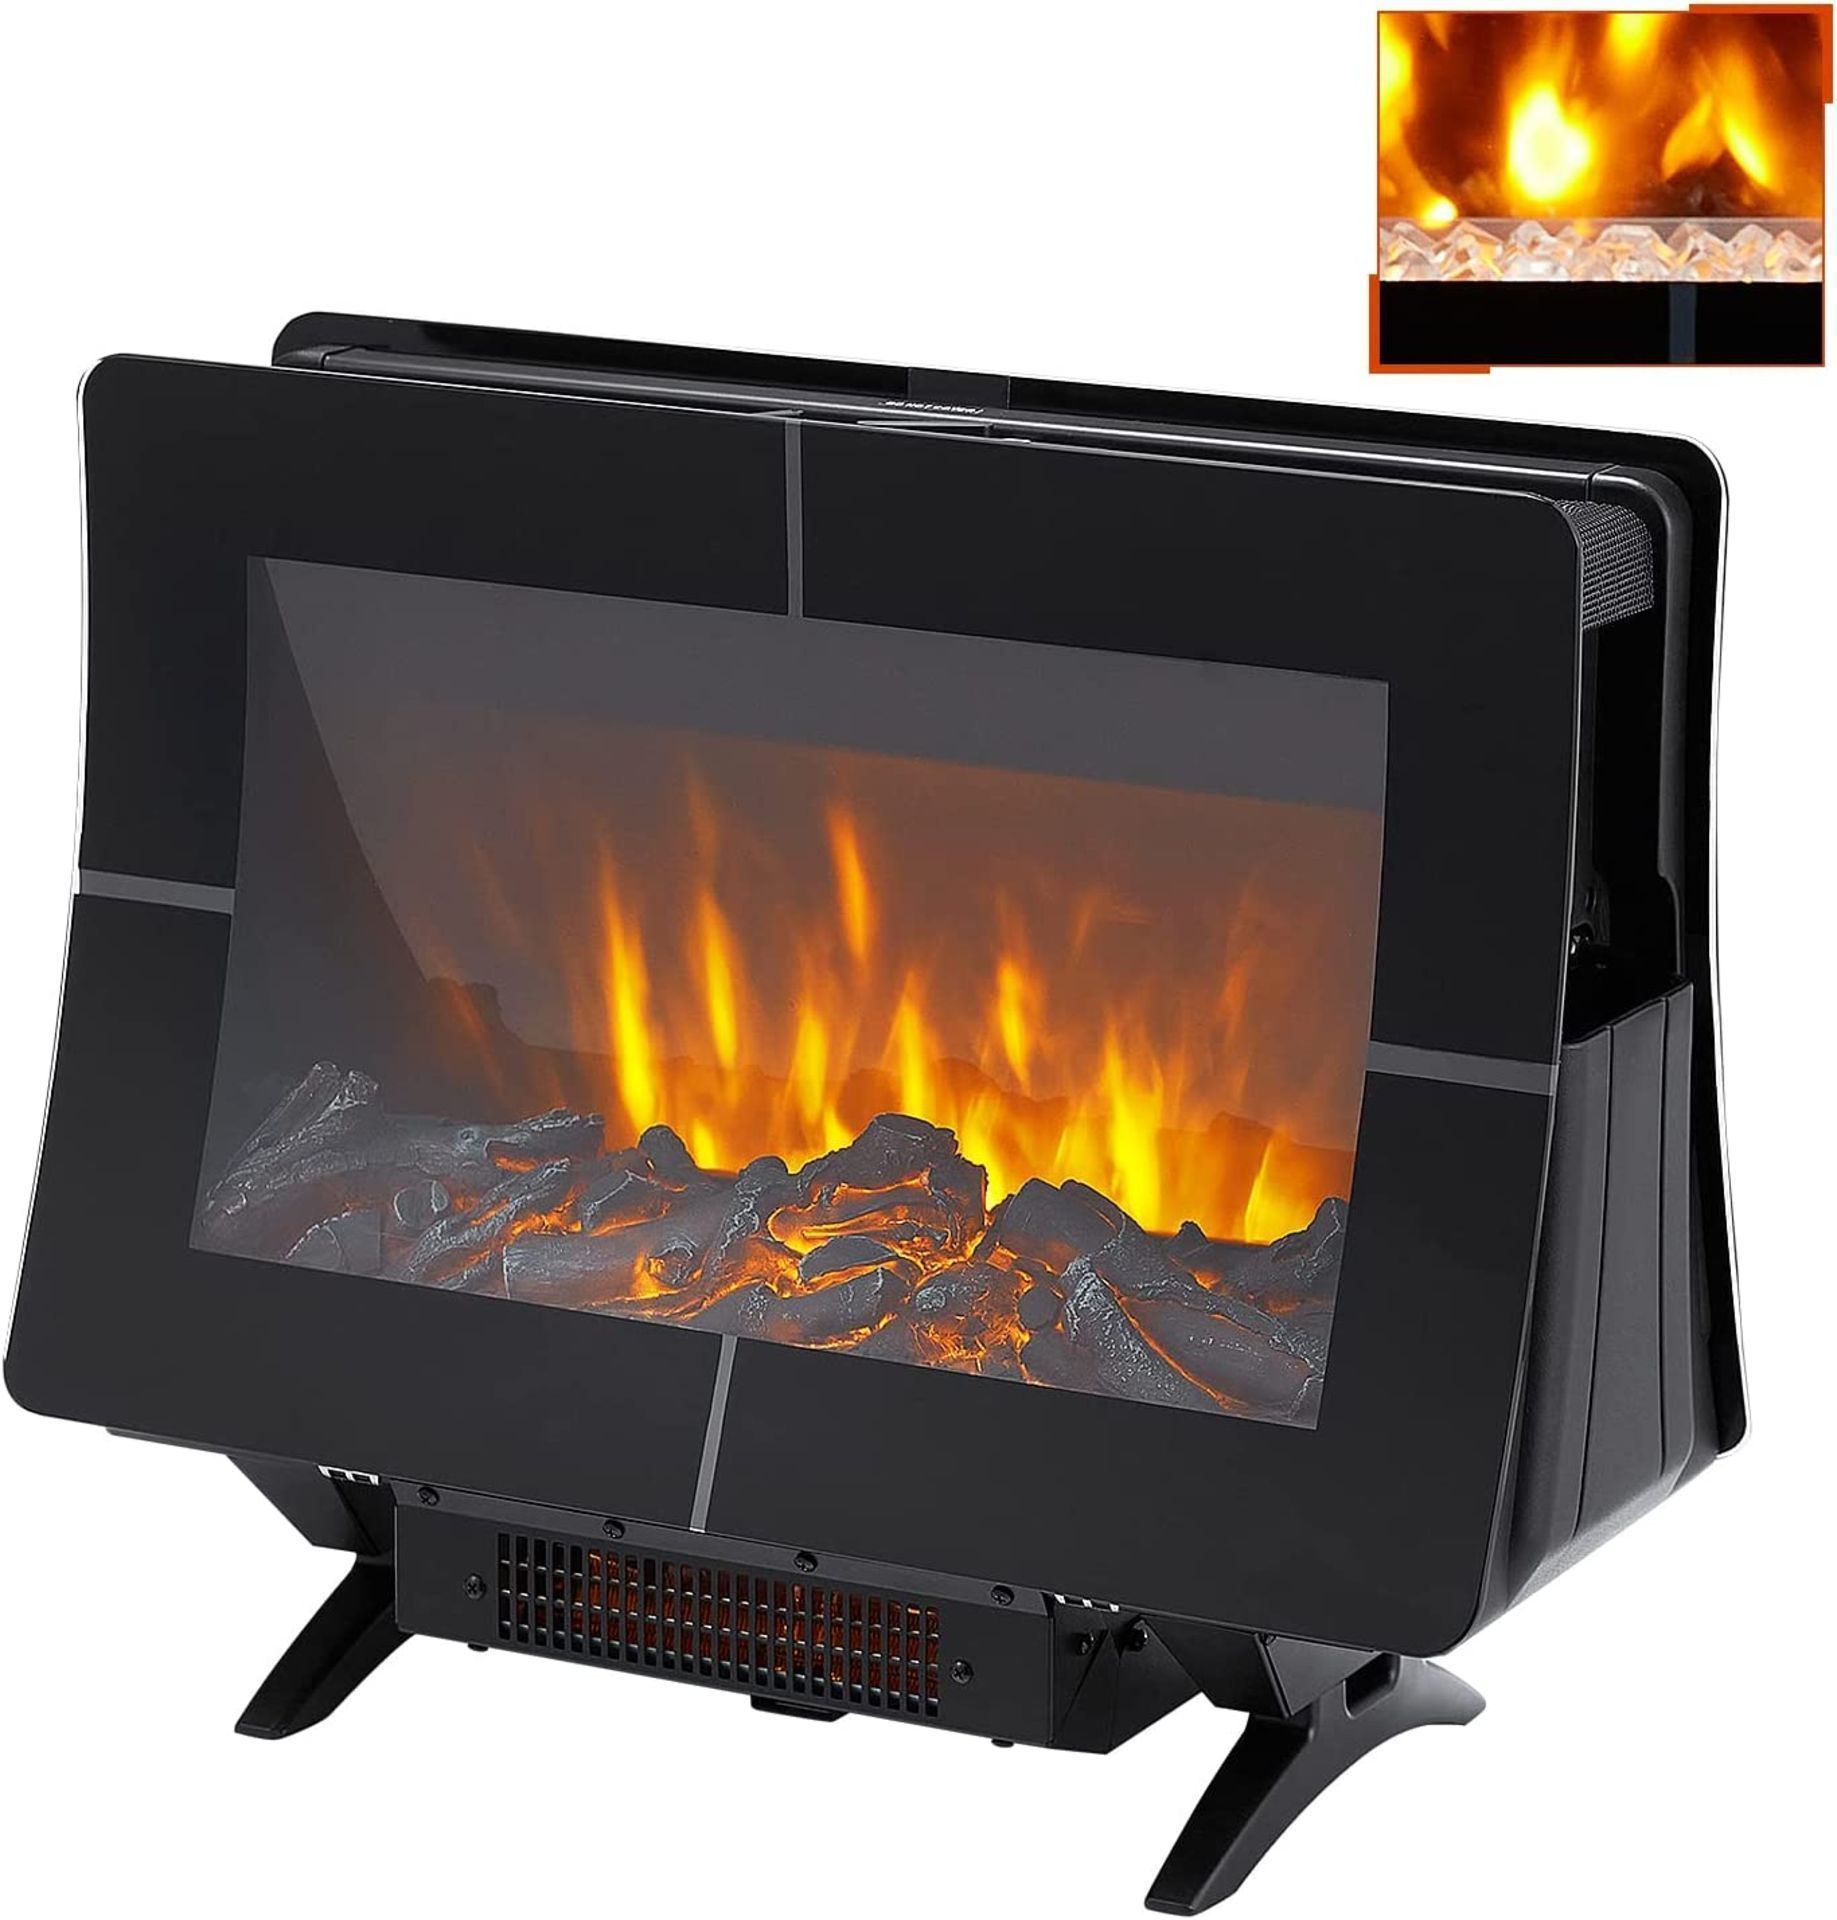 BRAND NEW 1000/2000W Freestanding Electric Fireplace Double-sided Heating Electric Fires Stove